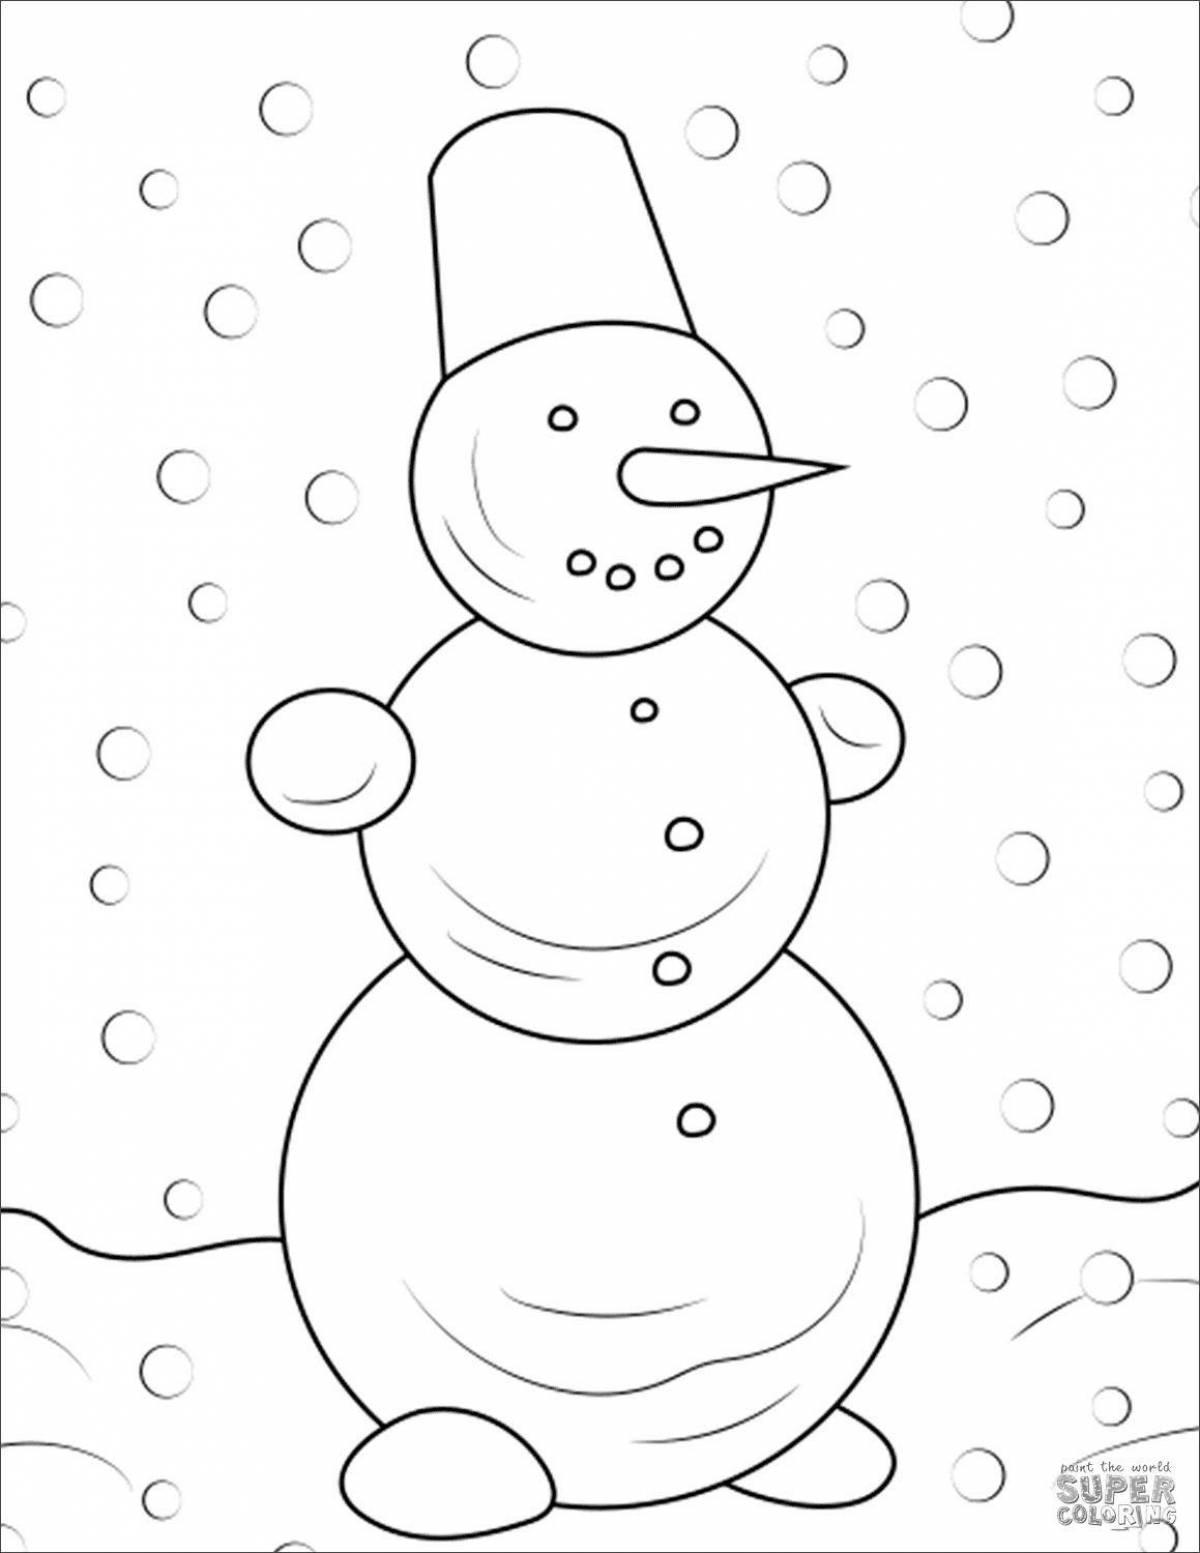 Playful winter coloring for children 2-3 years old